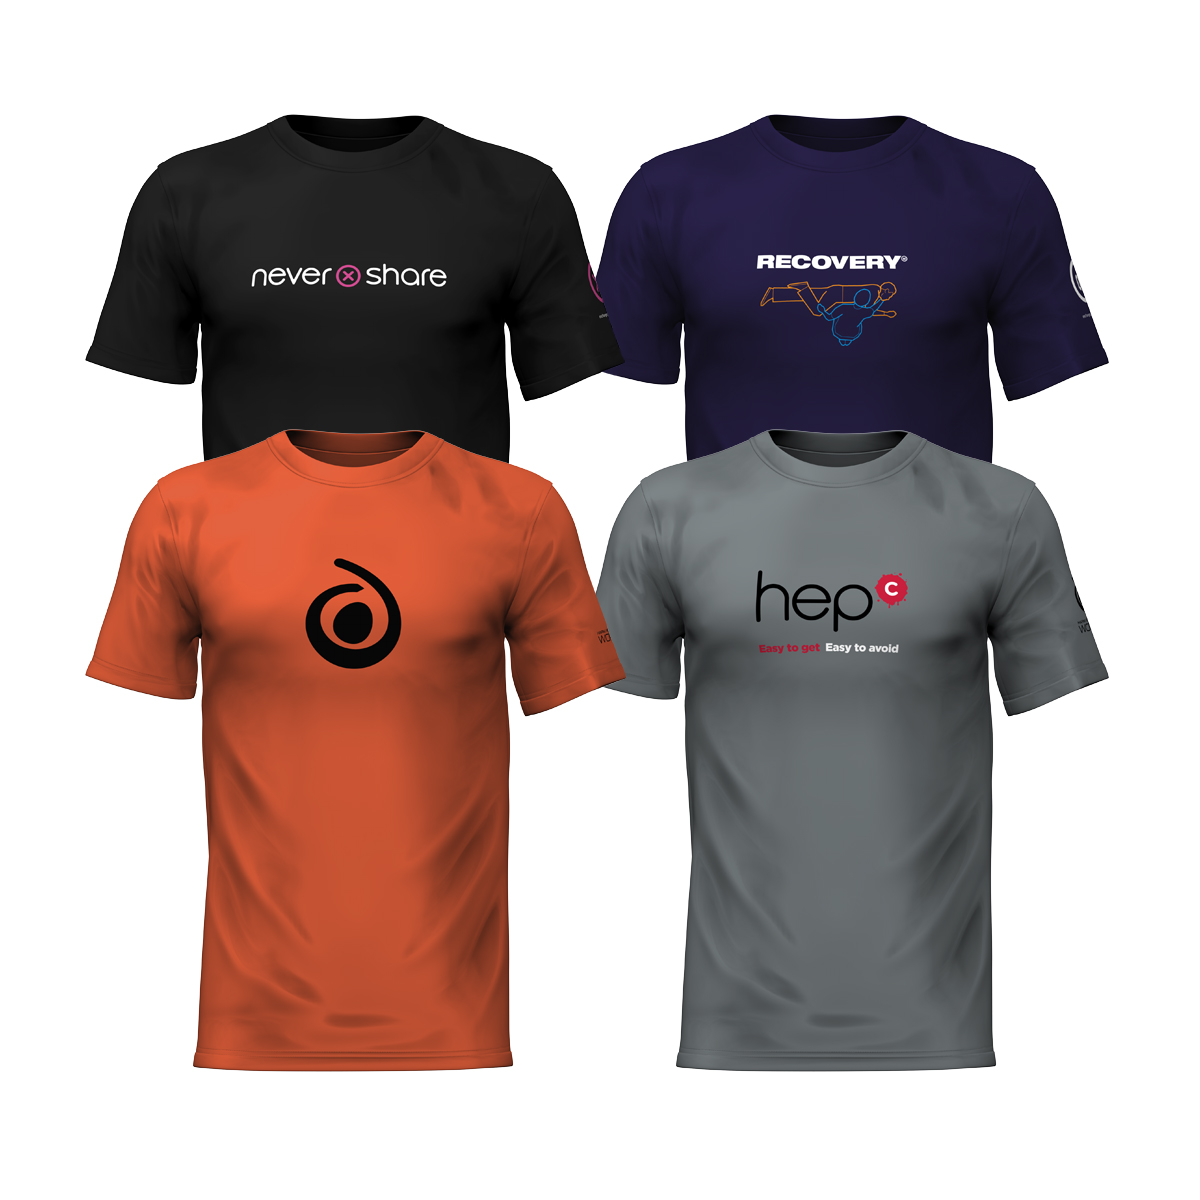 12 T-shirt pack: all 4 designs, mixed sizes